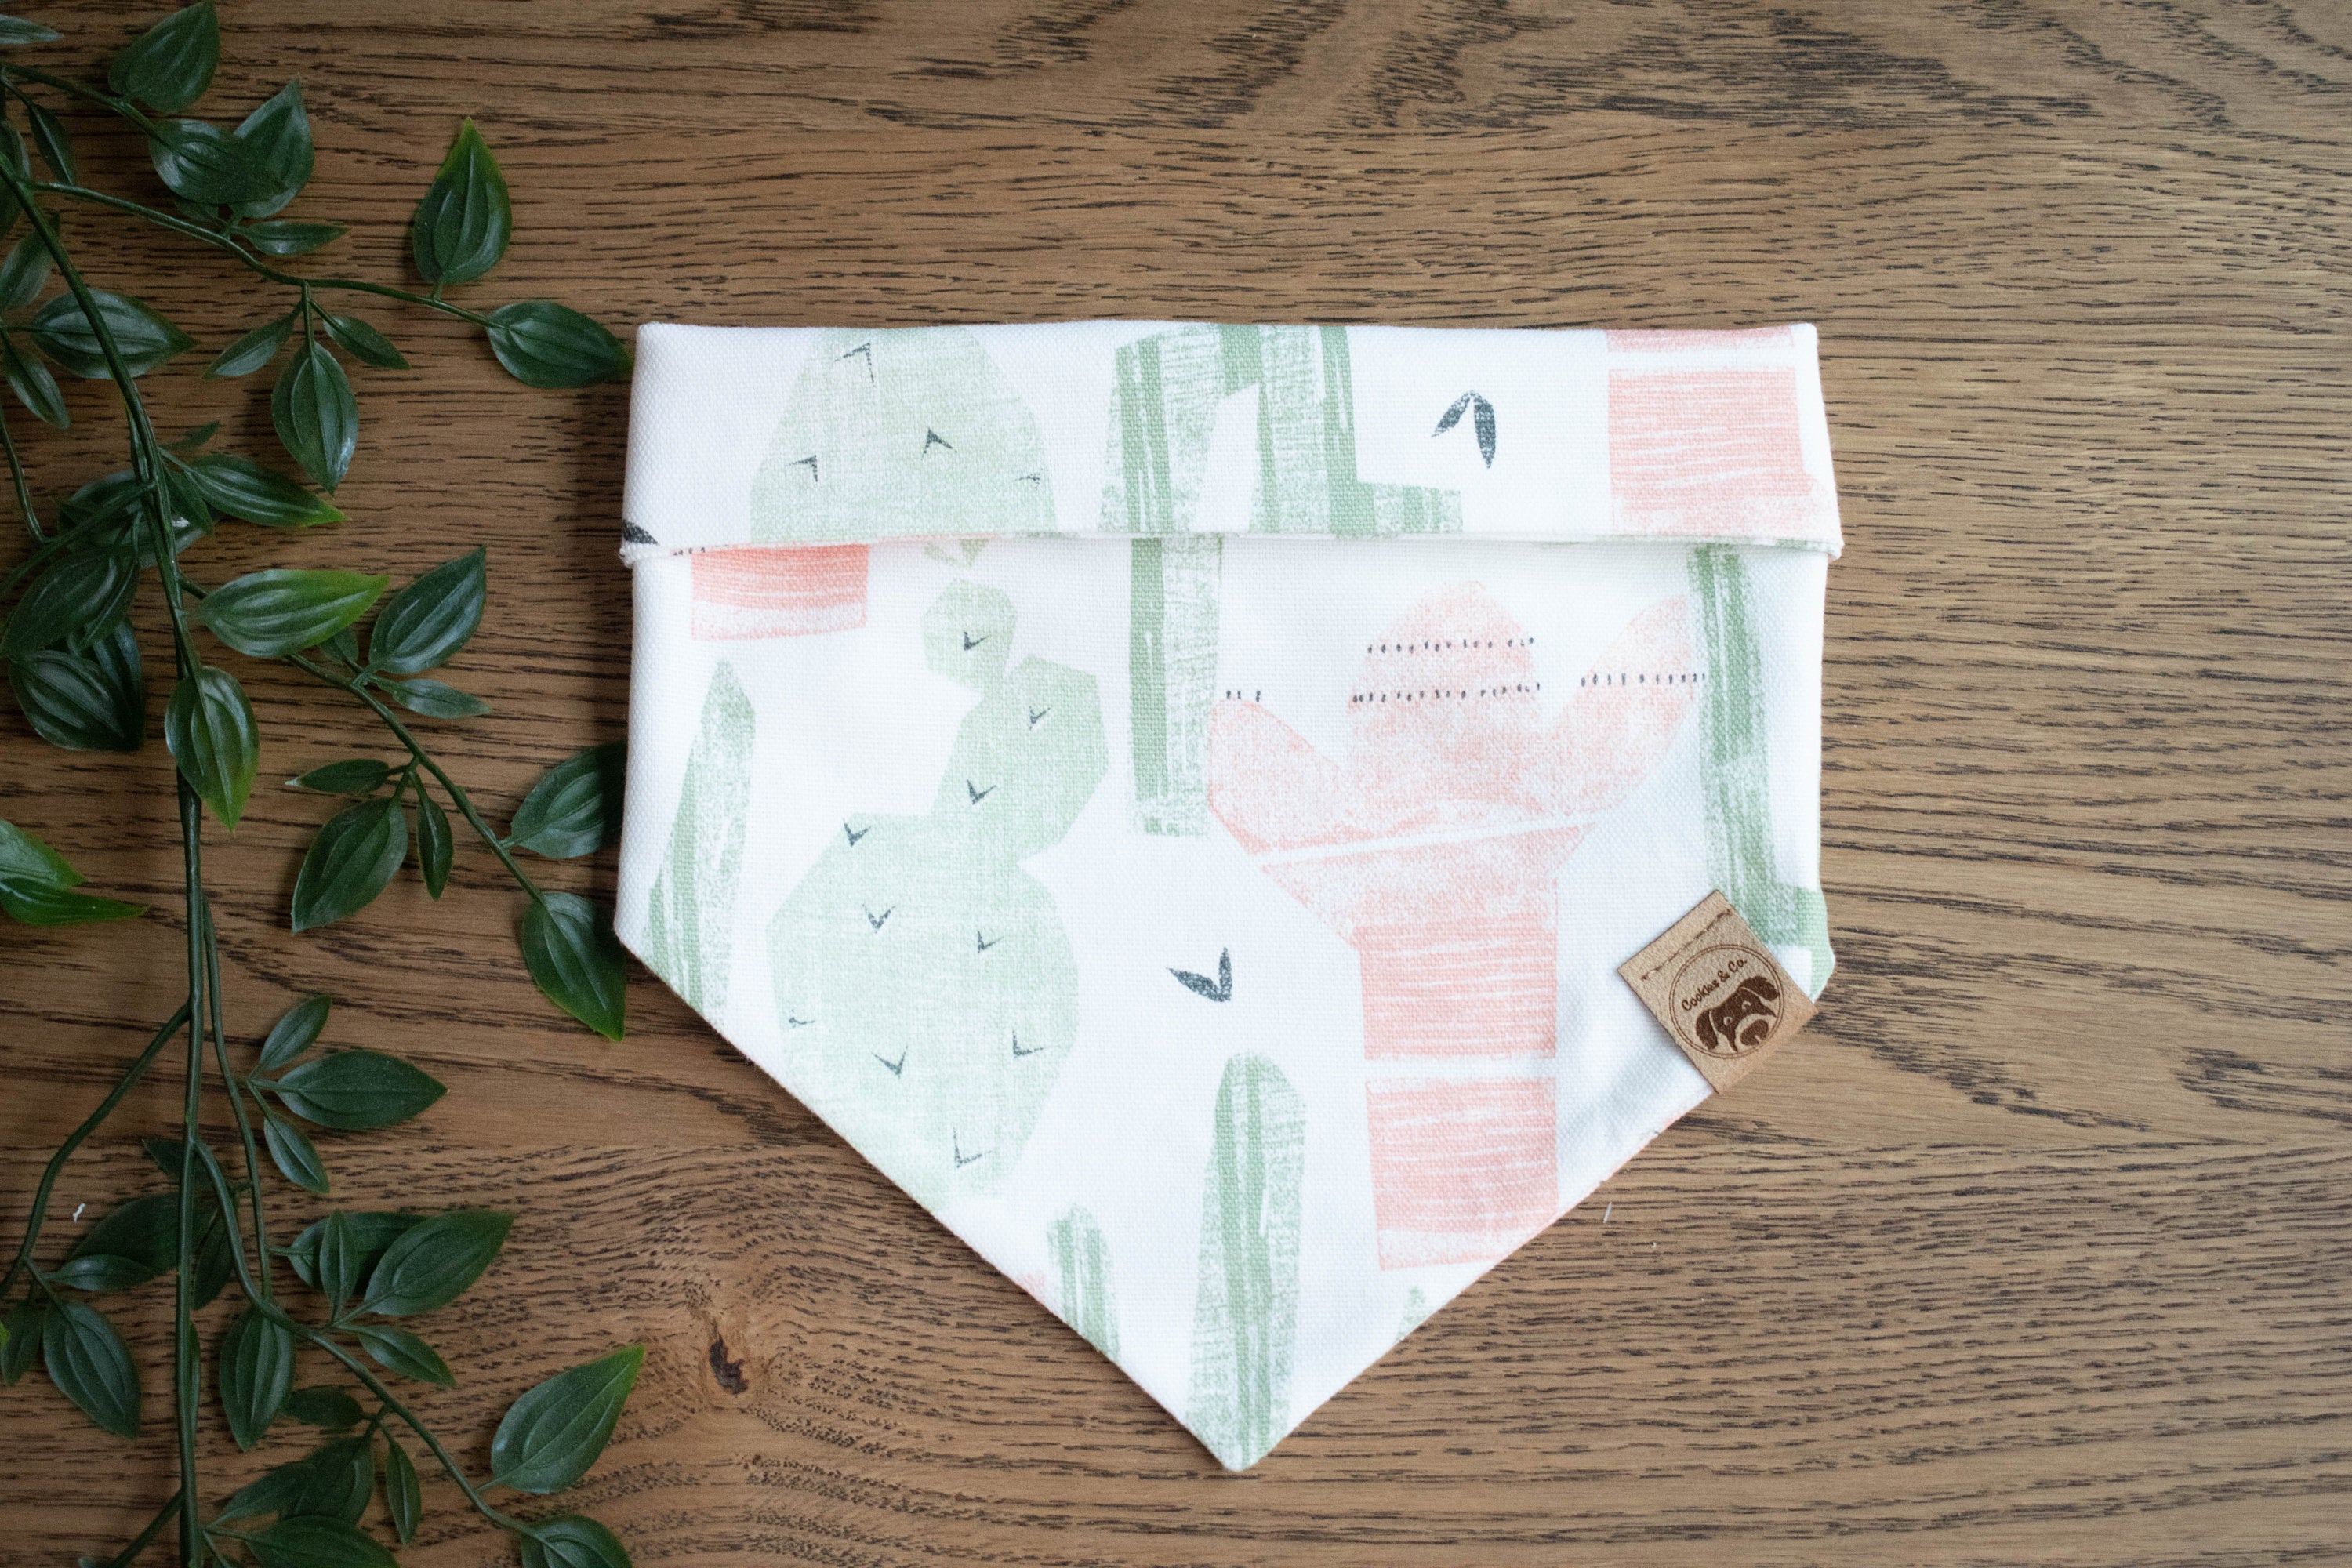 Sunkissed Cactus bandana print, featuring large cacti of different shapes and sizes on a white background